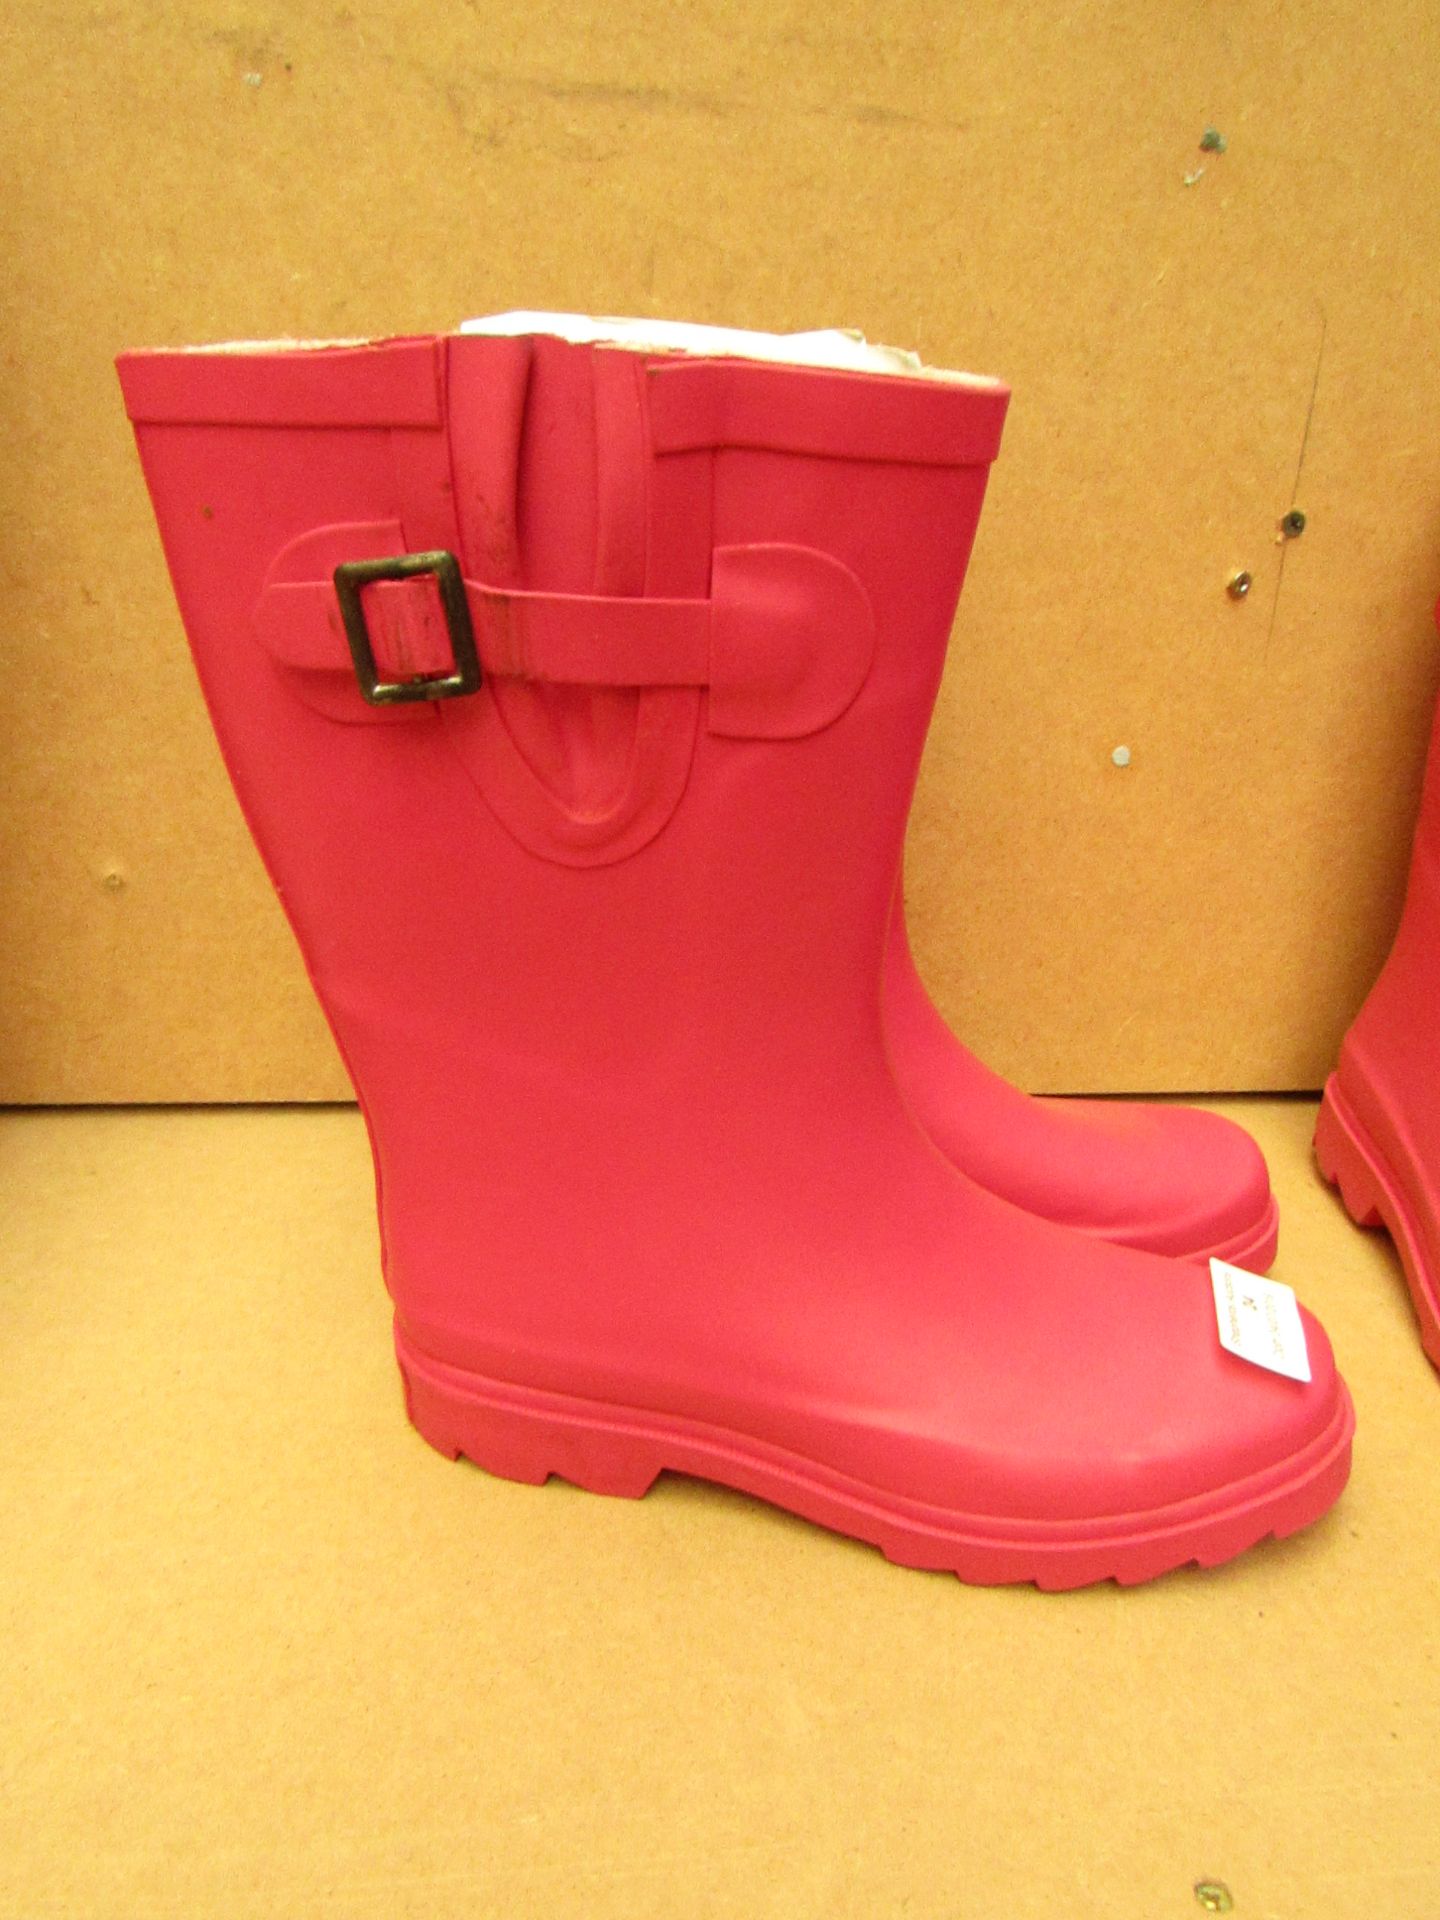 Pink Calf Length Wellington Boots size 35 new